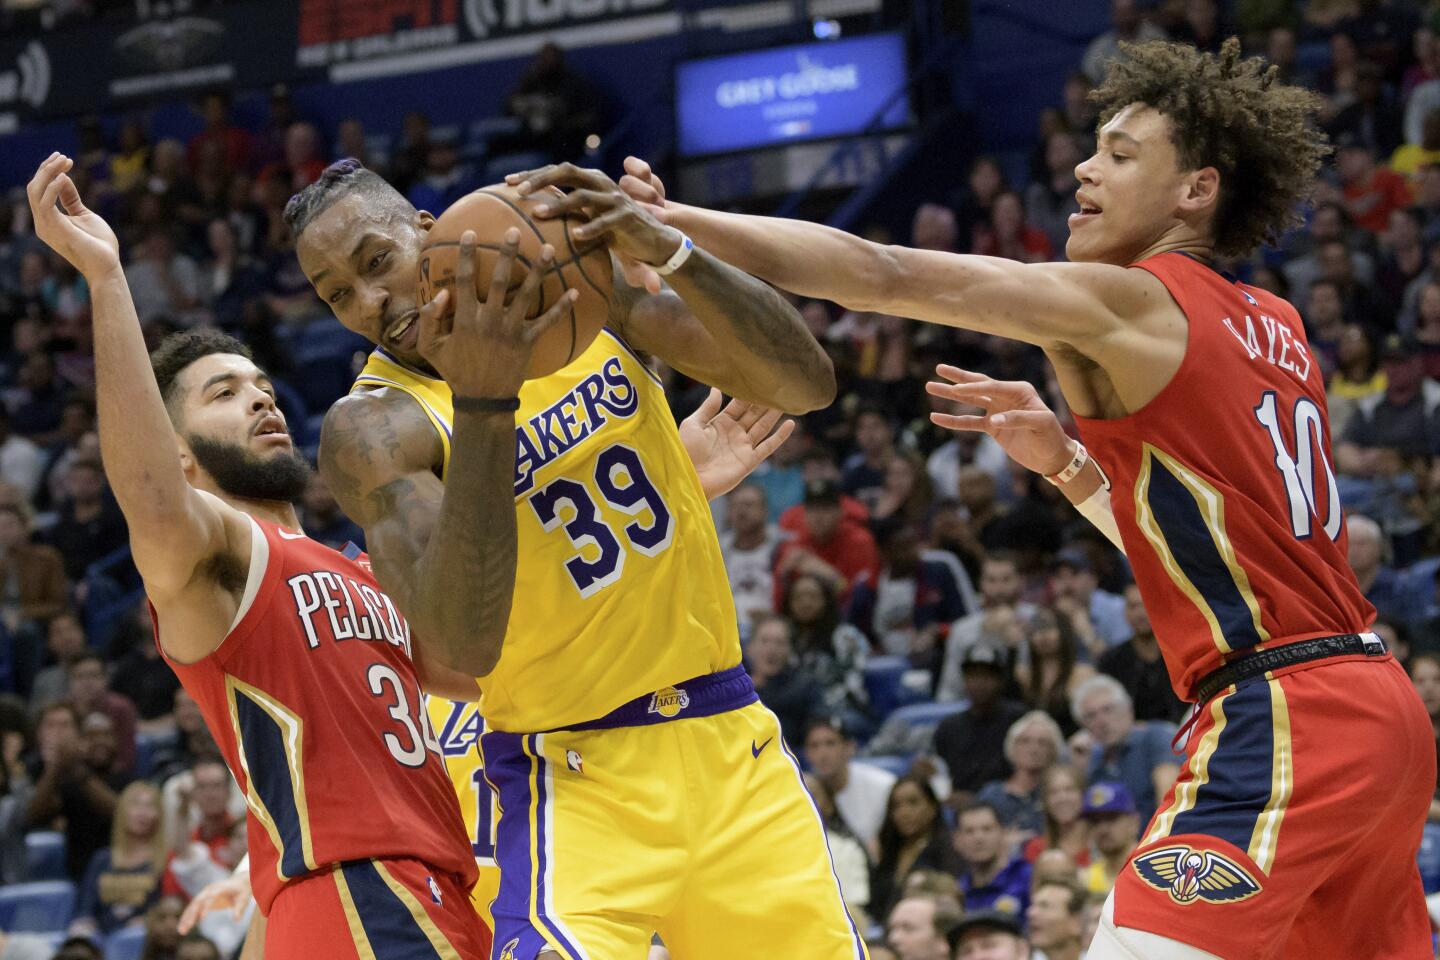 Lakers center Dwight Howard (39) battles for a rebound against Pelicans center Jaxson Hayes (10) and guard Kenrich Williams (34) during a game Nov. 27 at Smoothie King Center.